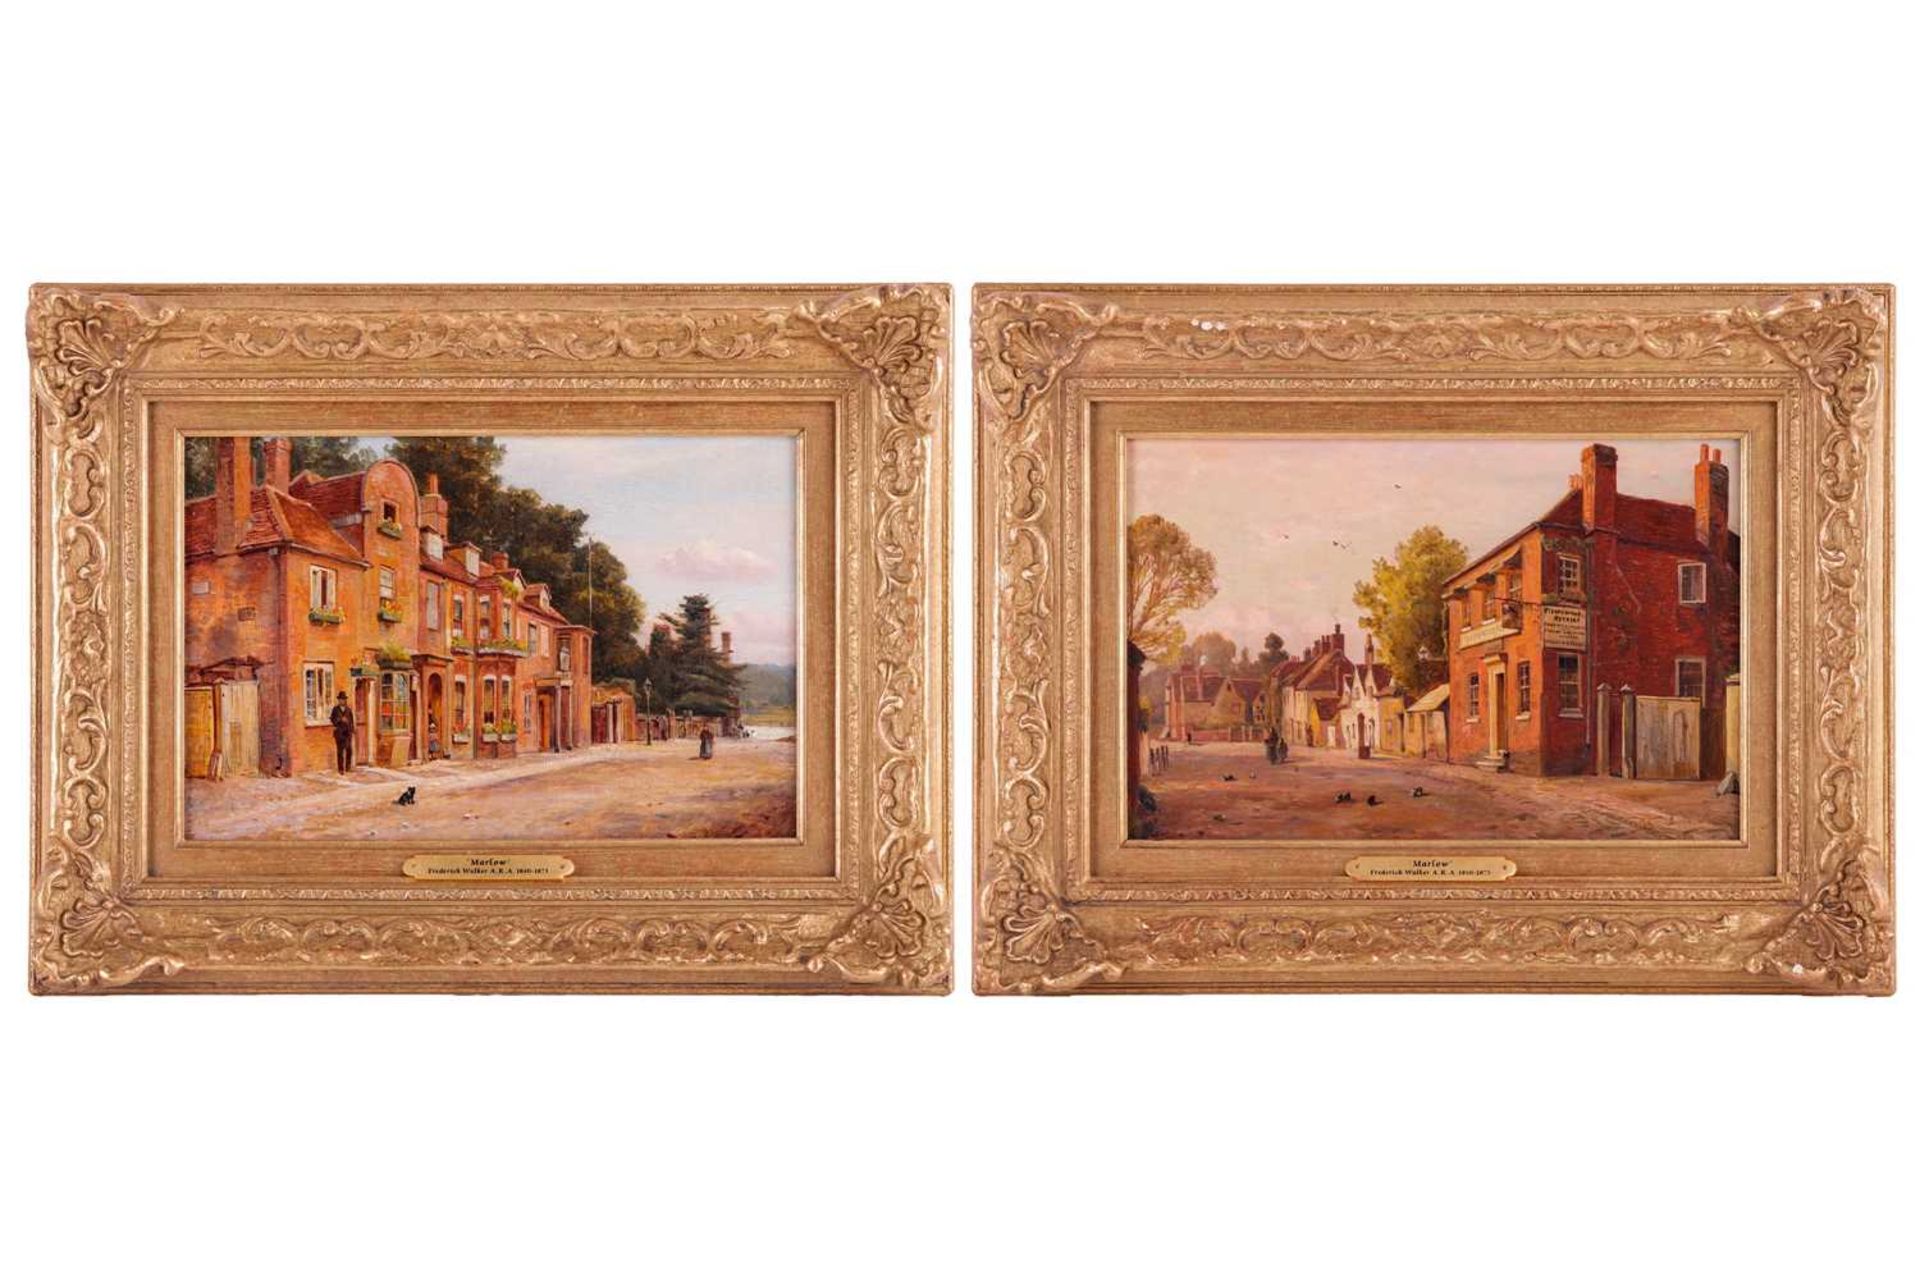 Attributed to Frederick Walker (1840 - 1875), Two views of St Peters Street, Marlow - a pair, unsign